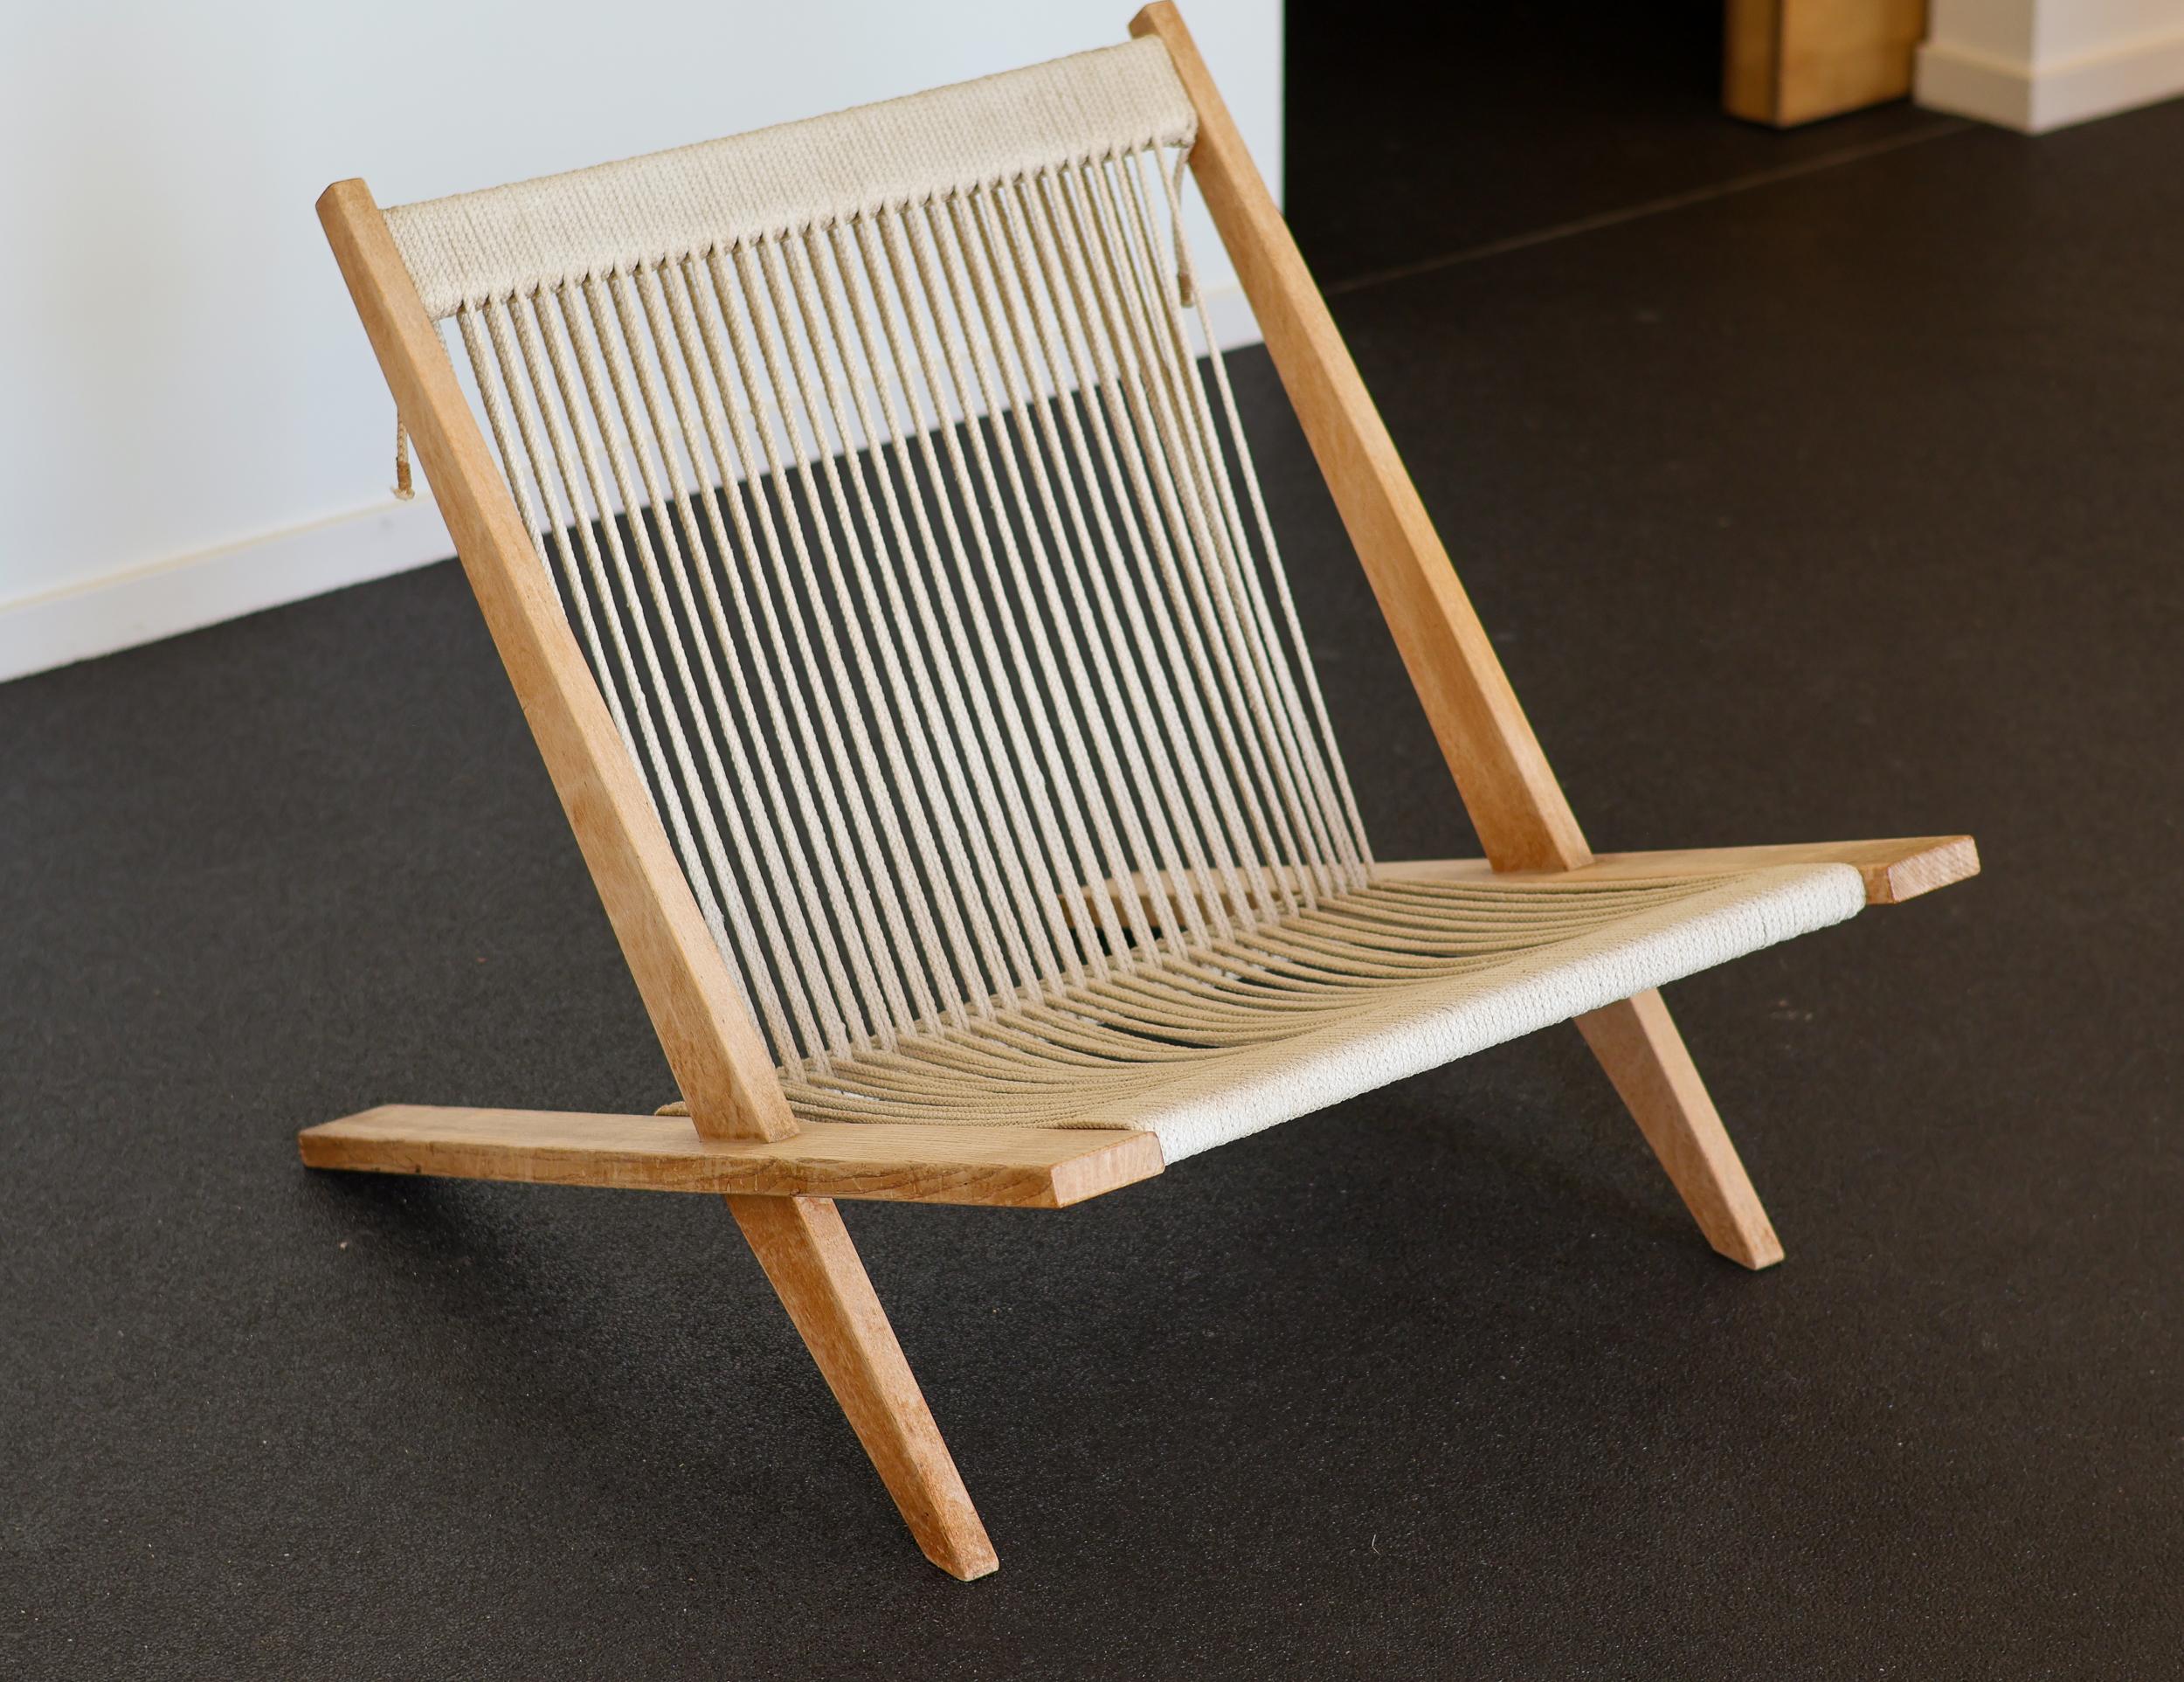 Rare easy chair JH 106 in ash with the original patinated flag halyard. 
Designed by Poul Kjærholm & Jørgen Høj in 1952. 
Manufactured by Thorald Madsen.
Unrestored all original condition.

This piece is part of an important collection of early